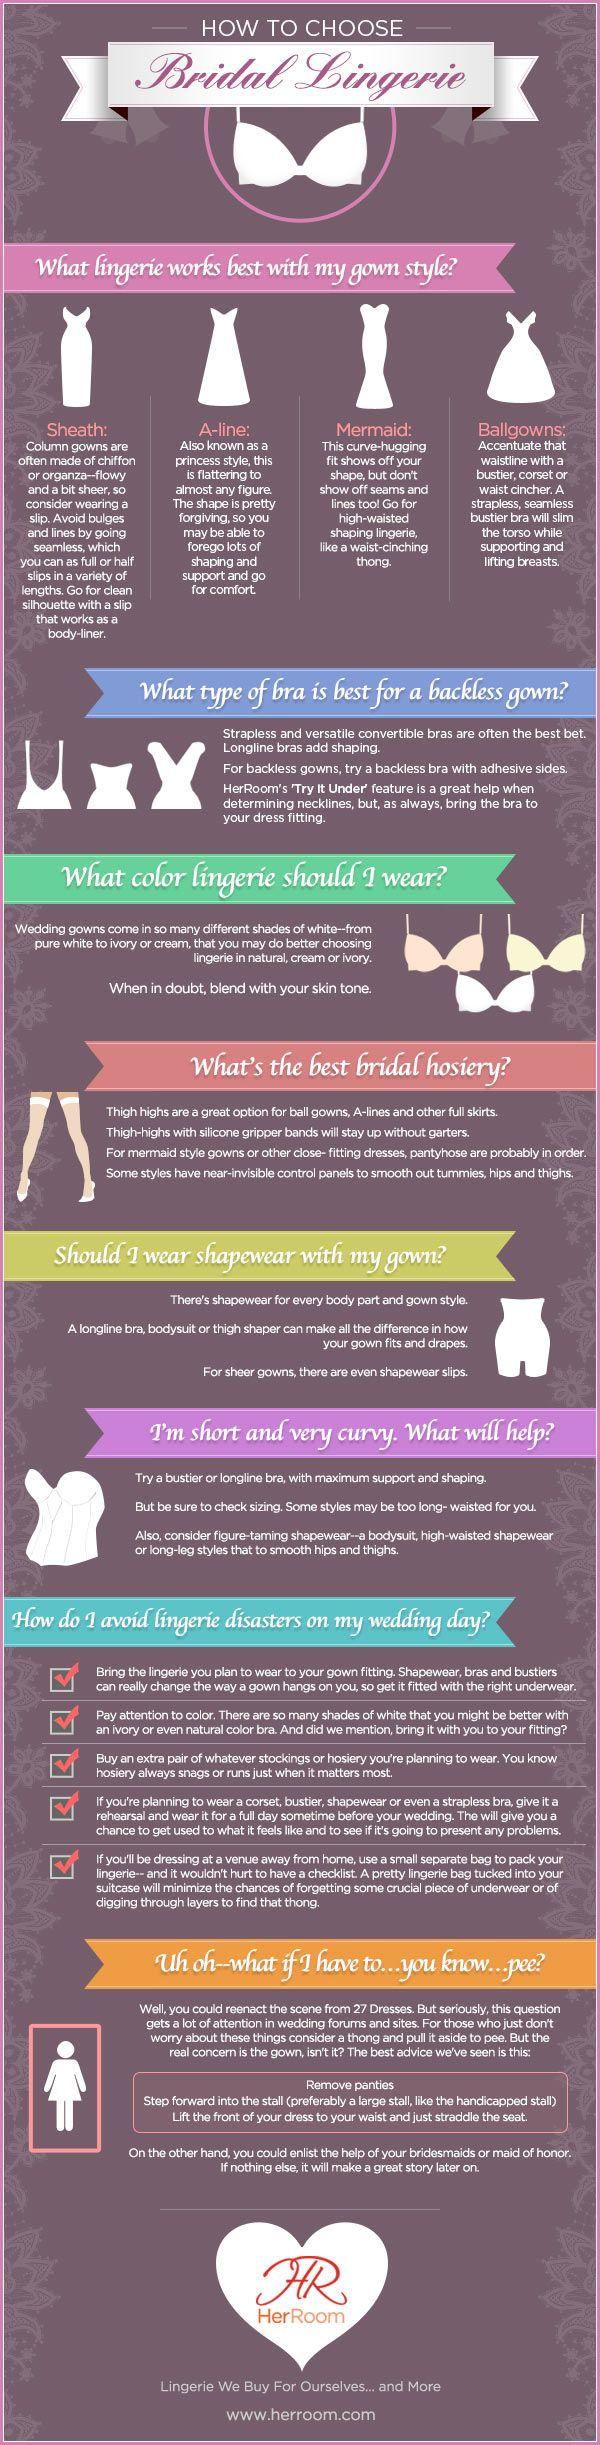 Wedding - How To Choose Bridal Lingerie